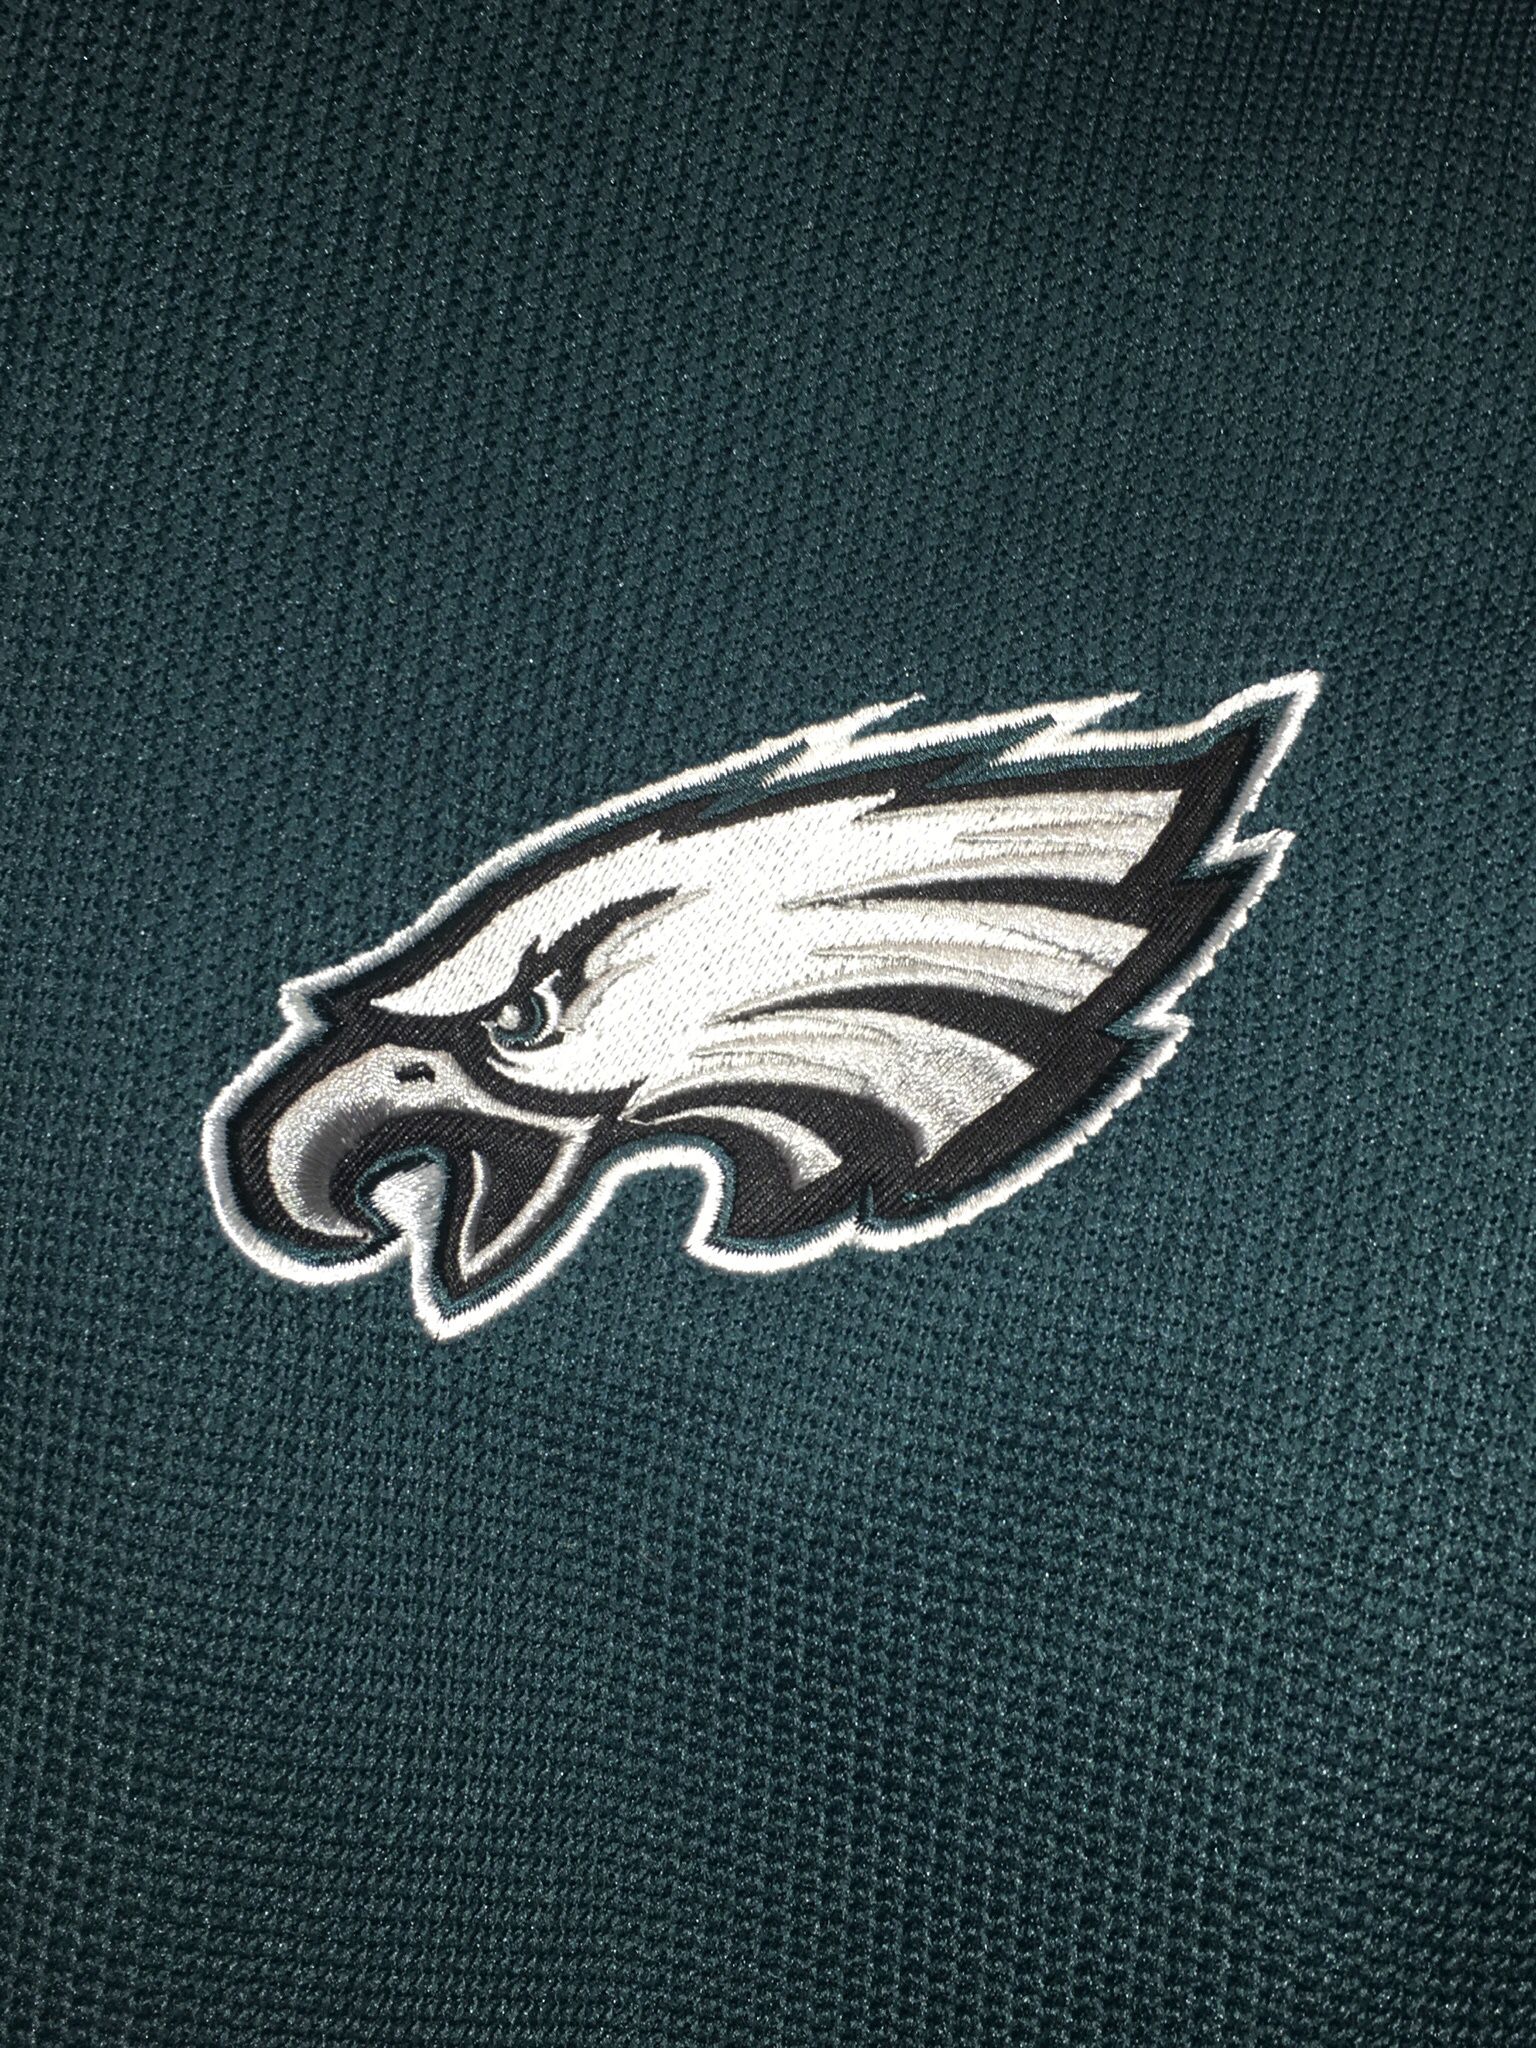 Philadelphia Eagles Official NFL XL Full Zip Sweatshirt/Jacket thermal No rips, tears or stains  I have 30+ Philadelphia items listed